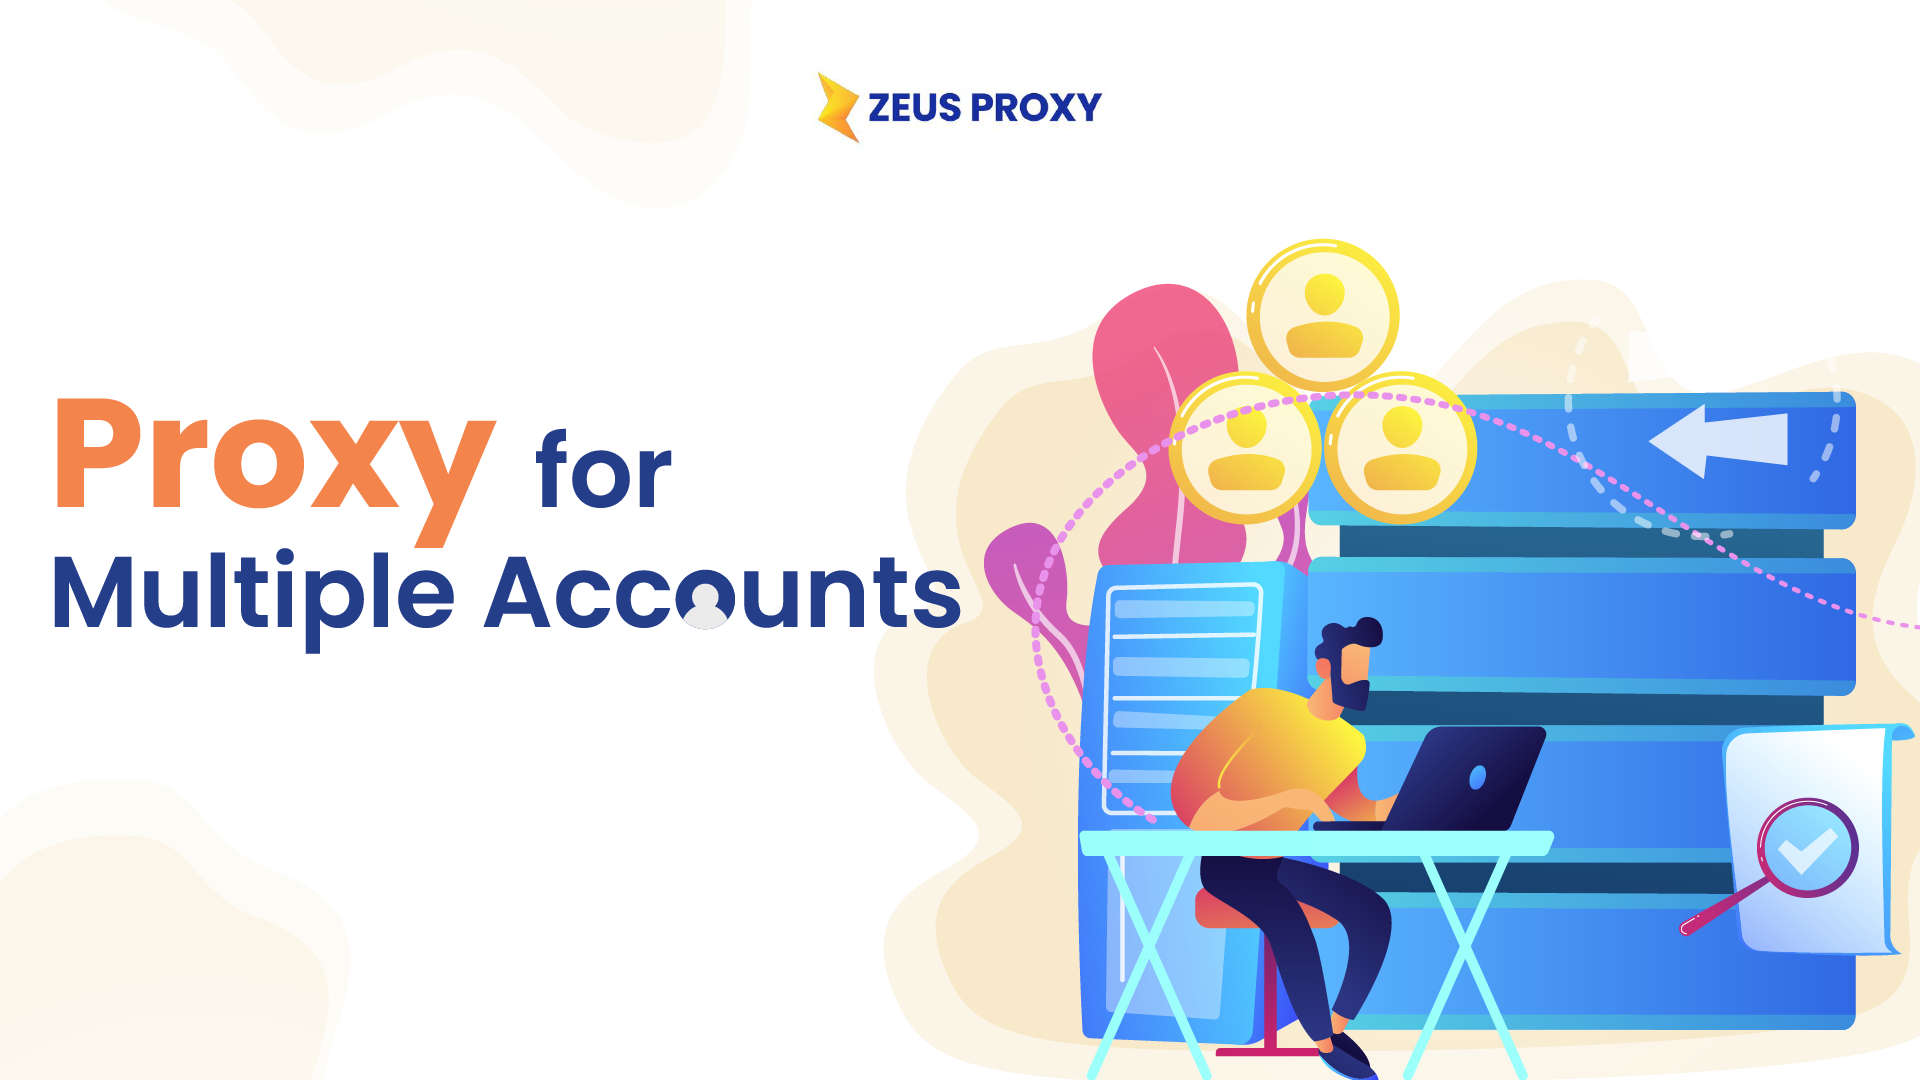 What type of proxy should you use to create multiple accounts?